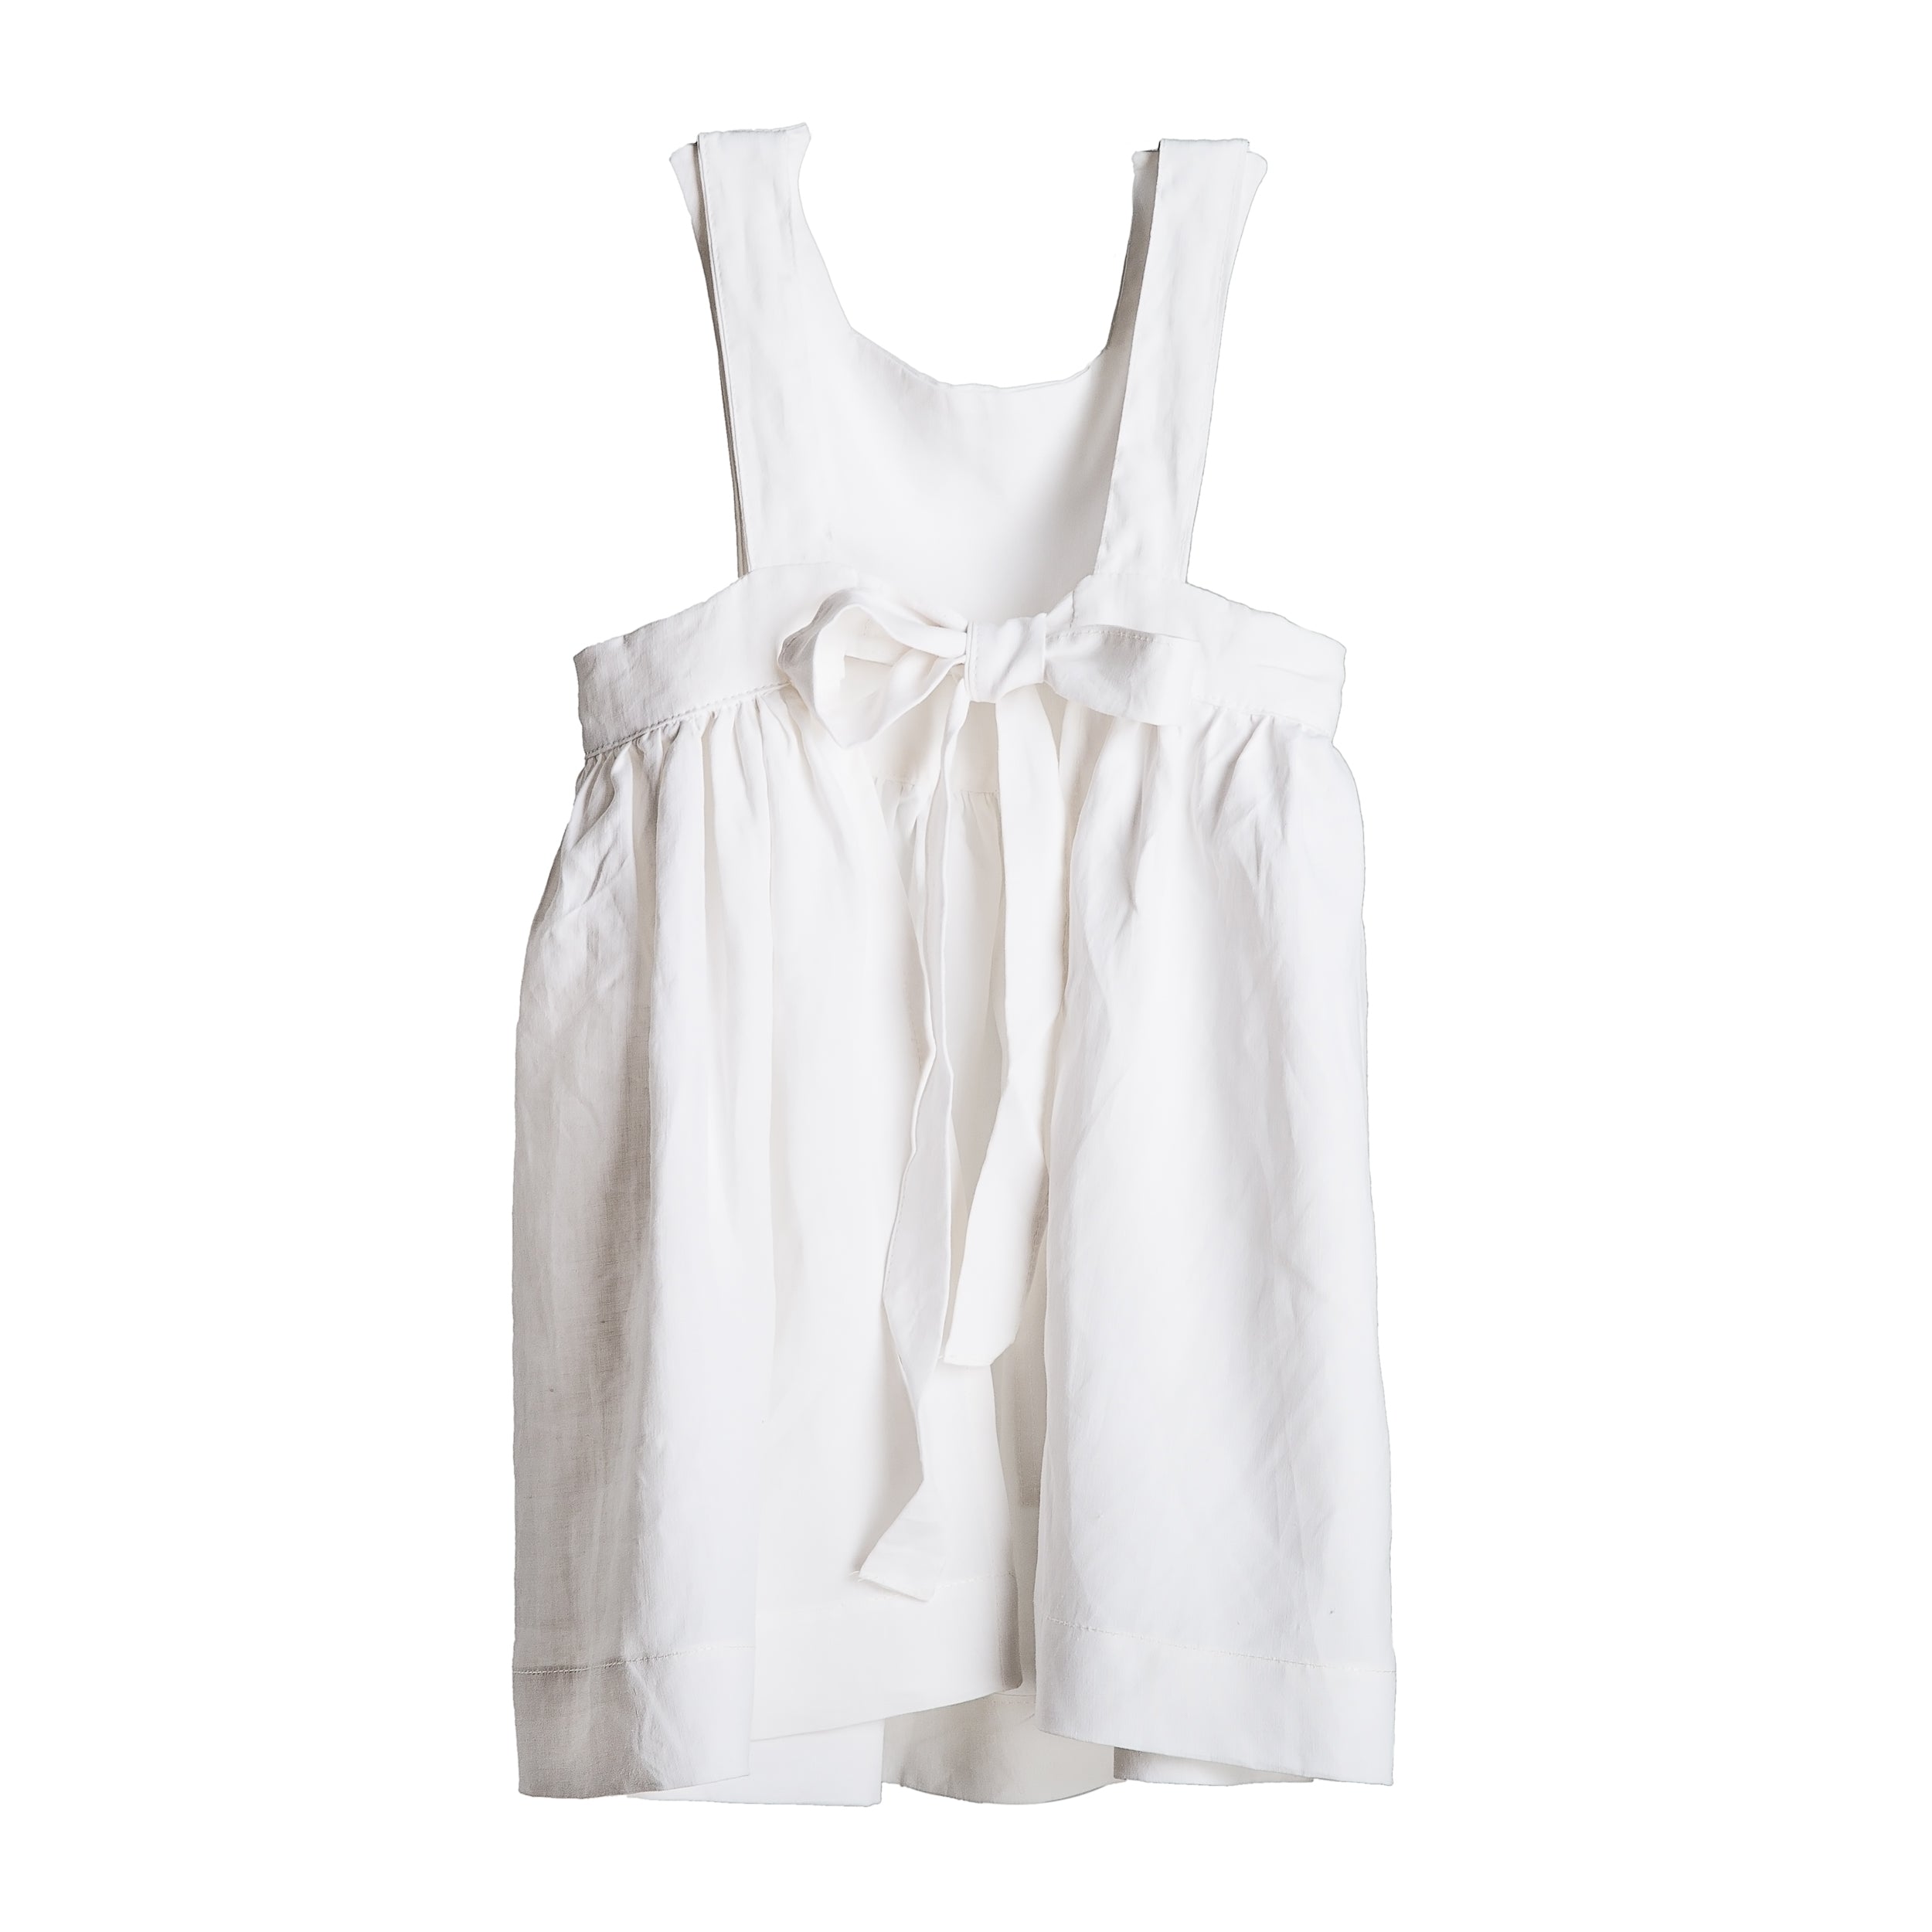 Carrier Company Child's Pinafore in White Linen